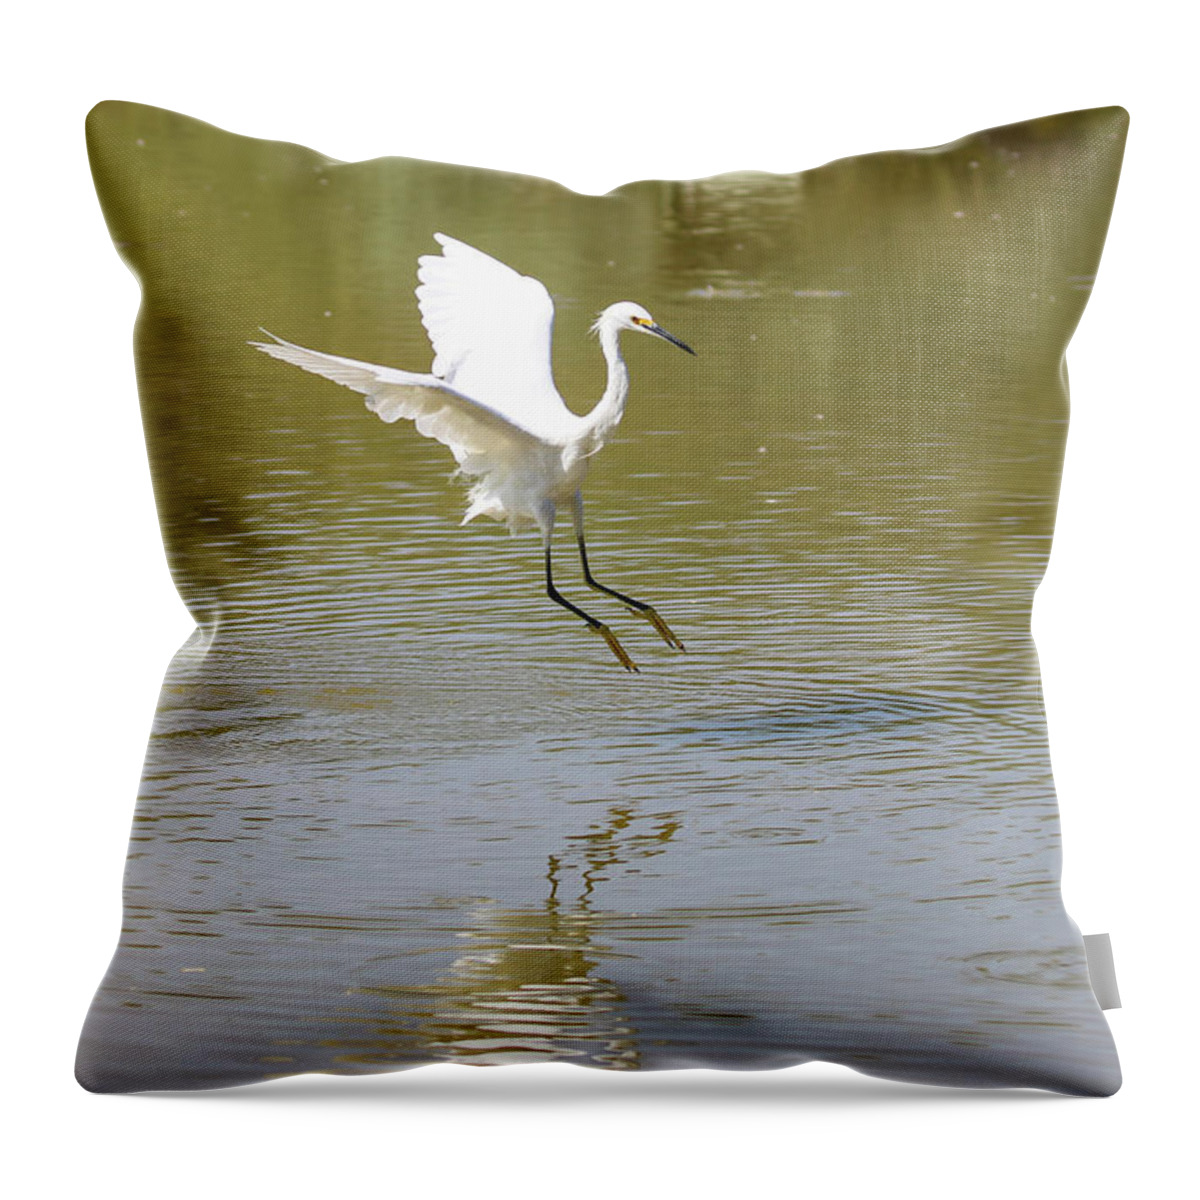 2020 Throw Pillow featuring the photograph Snowy Egret Landing by Dawn Richards